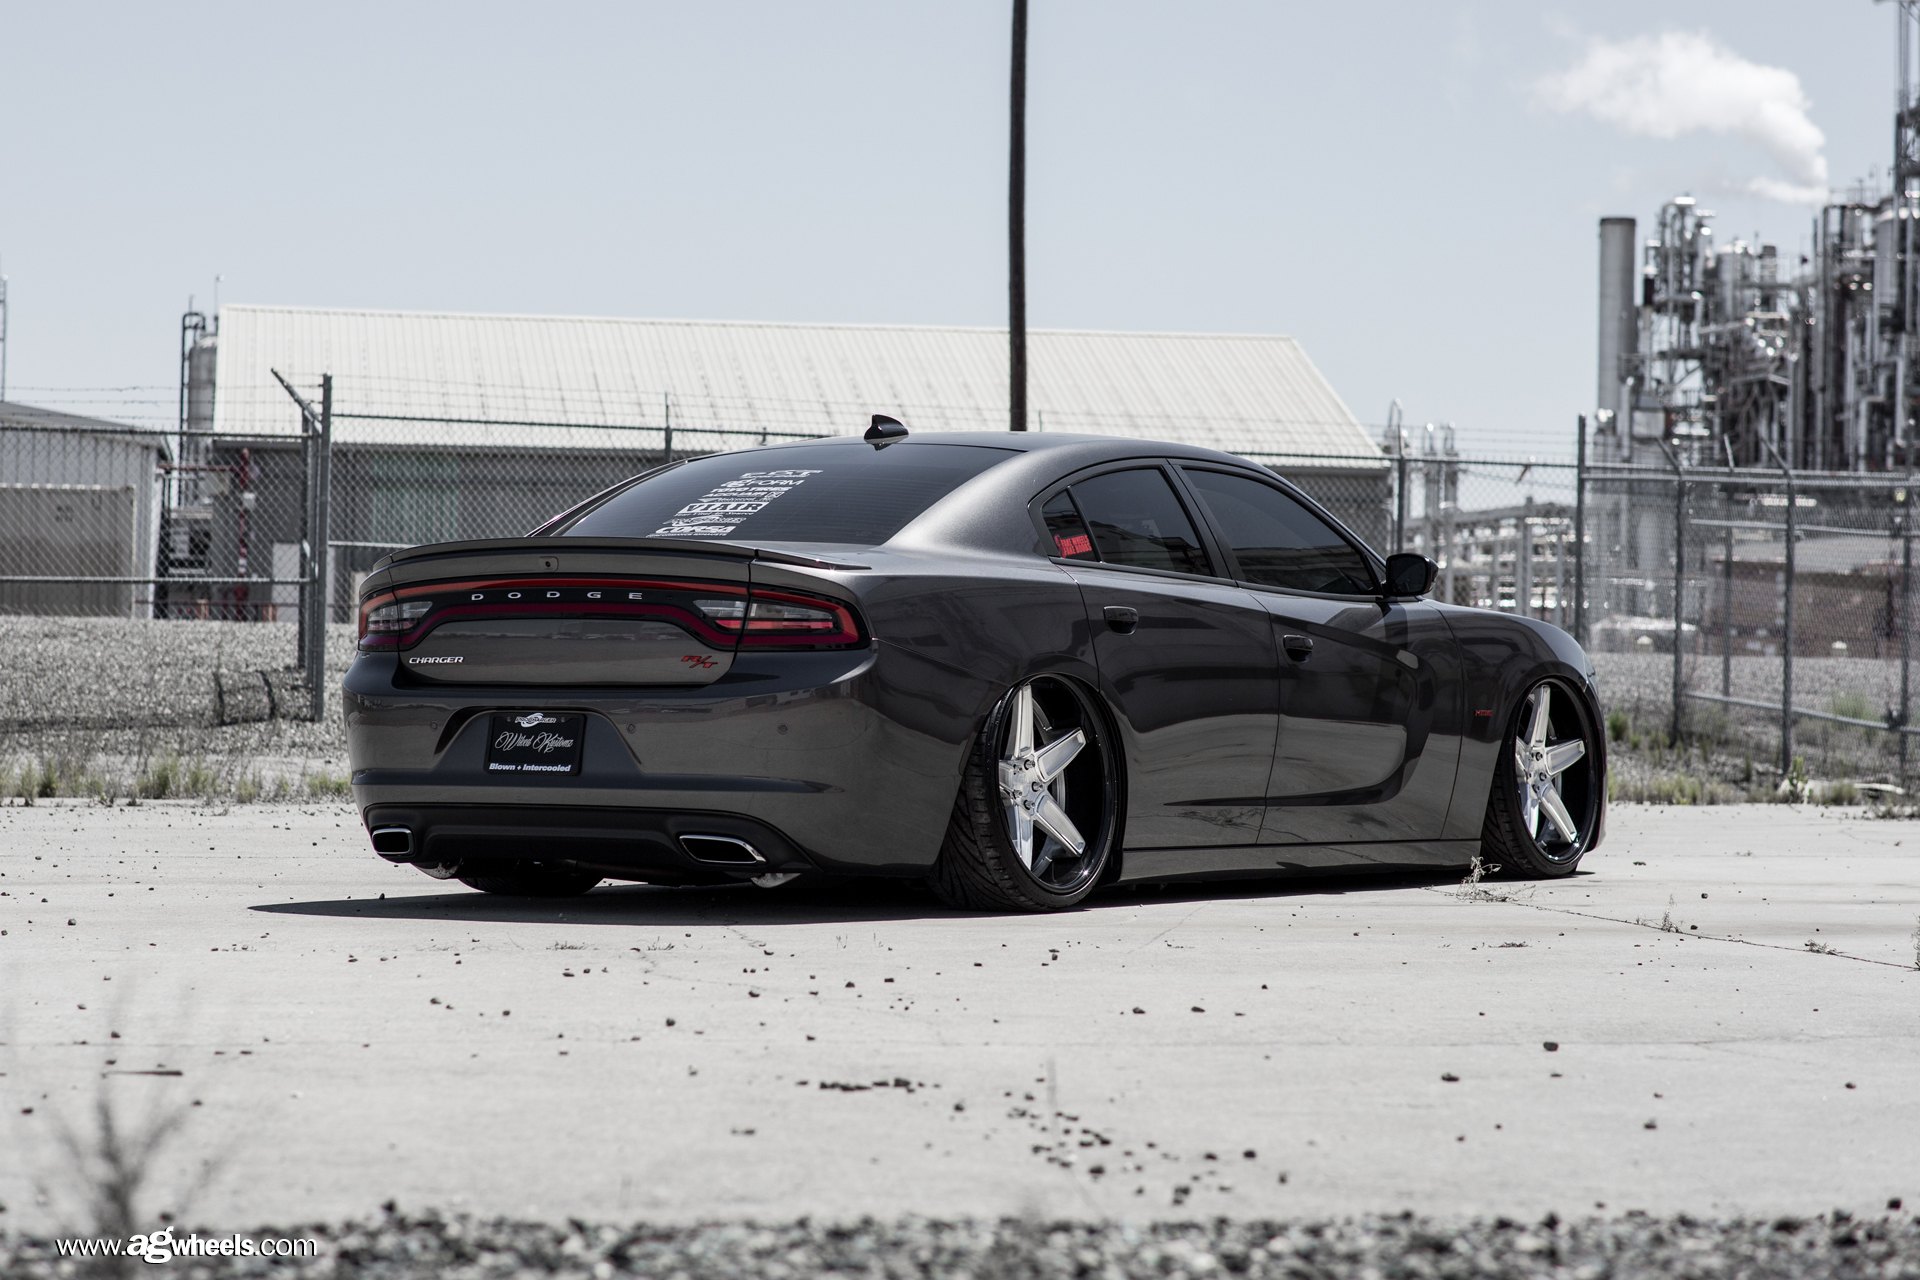 Gray Dodge Charger with Factory Style Rear Spoiler - Photo by Avant Garde Wheels